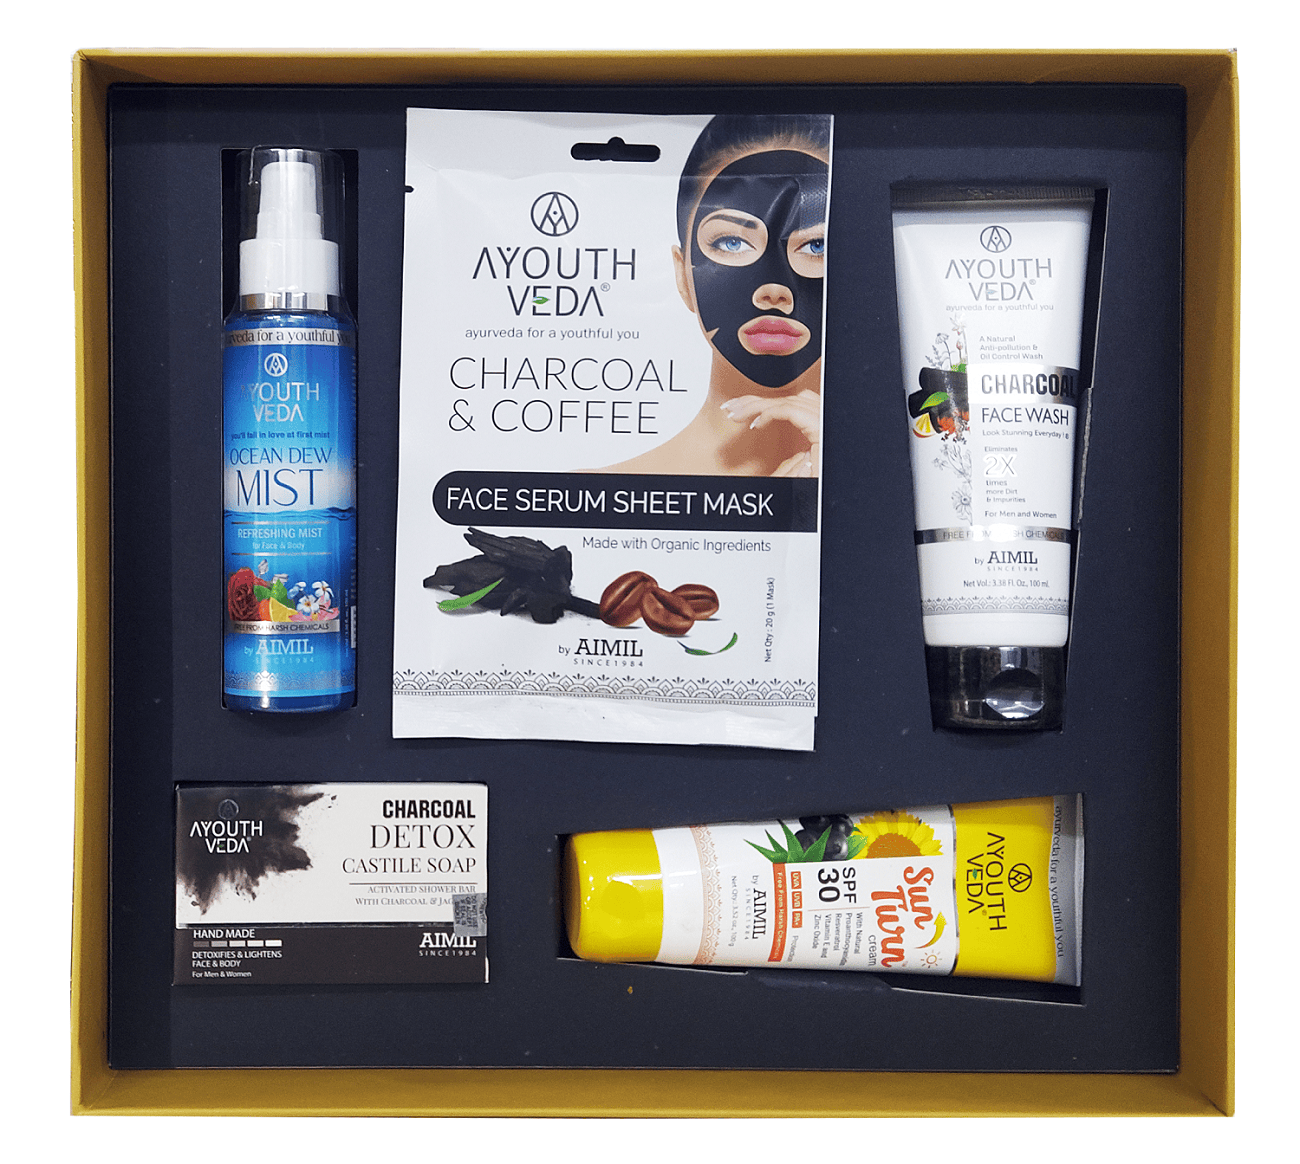 Archies | Archies Ayouth Charcoal Detox Skin Care Gift Set ( Charcoal face wash,Charcoal coffee face serum sheet mask,Charcoal detox castile soap,Ocean dew mist,Sun Turn Cream SPF 30 )